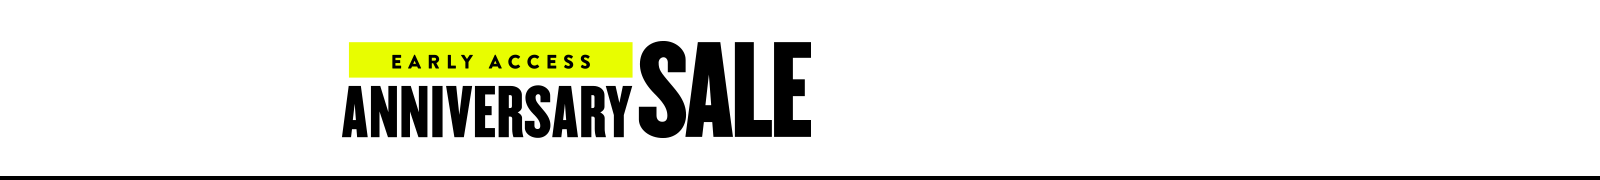 NORDSTROM ANNUAL SALE